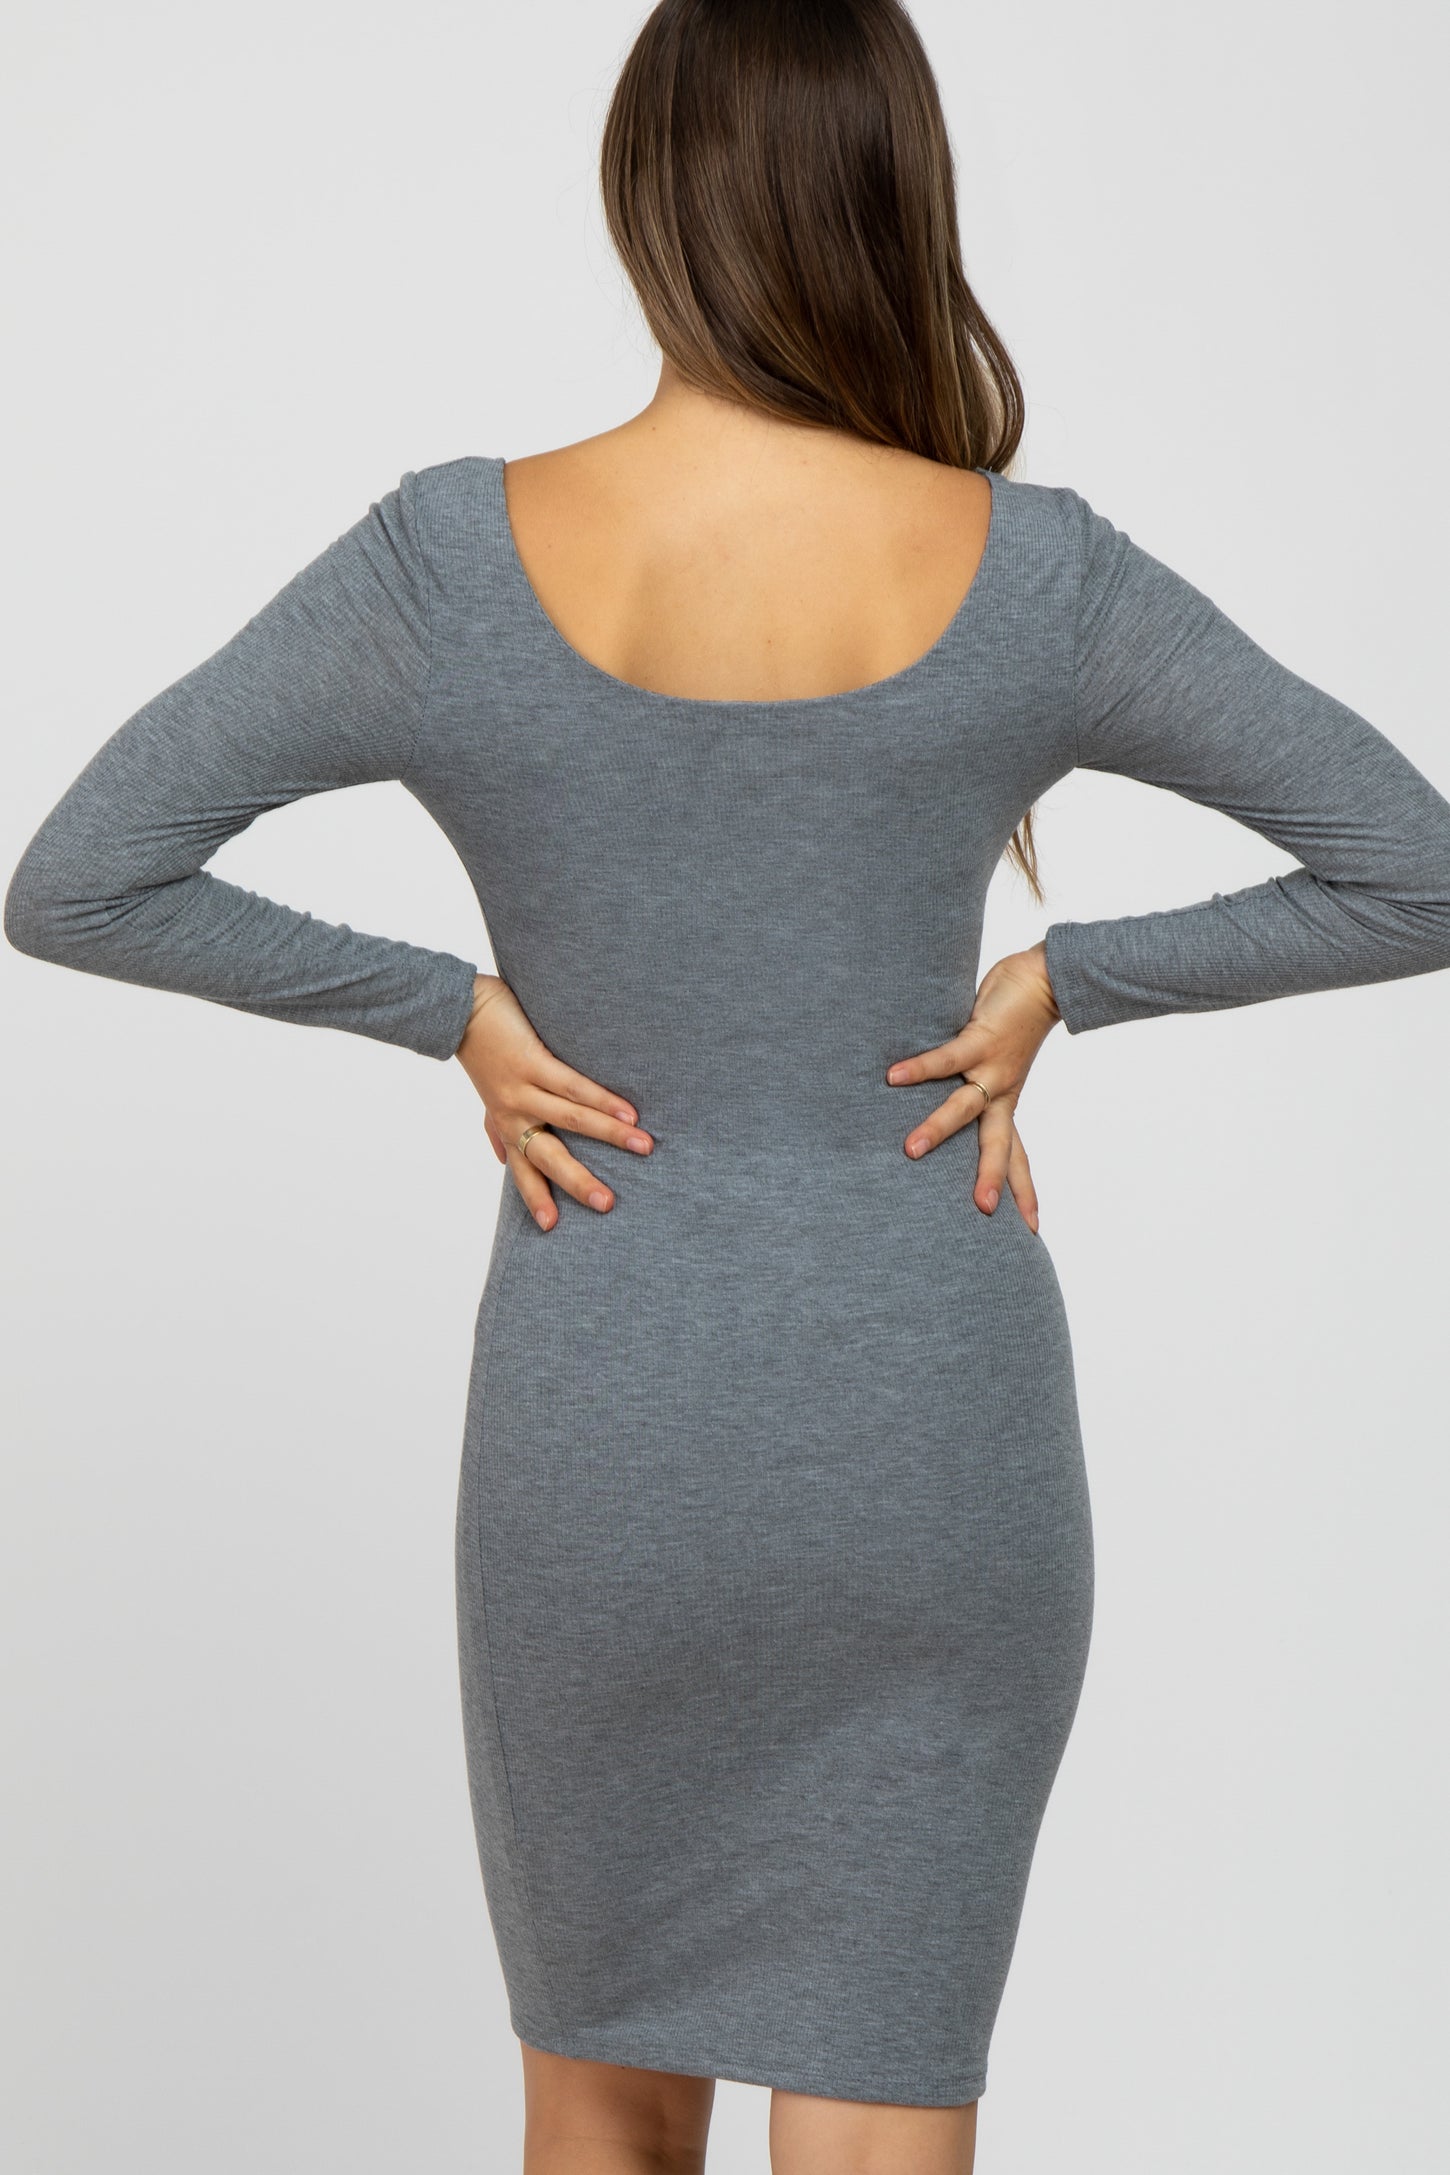 Grey Ribbed Fitted Long Sleeve Maternity Dress